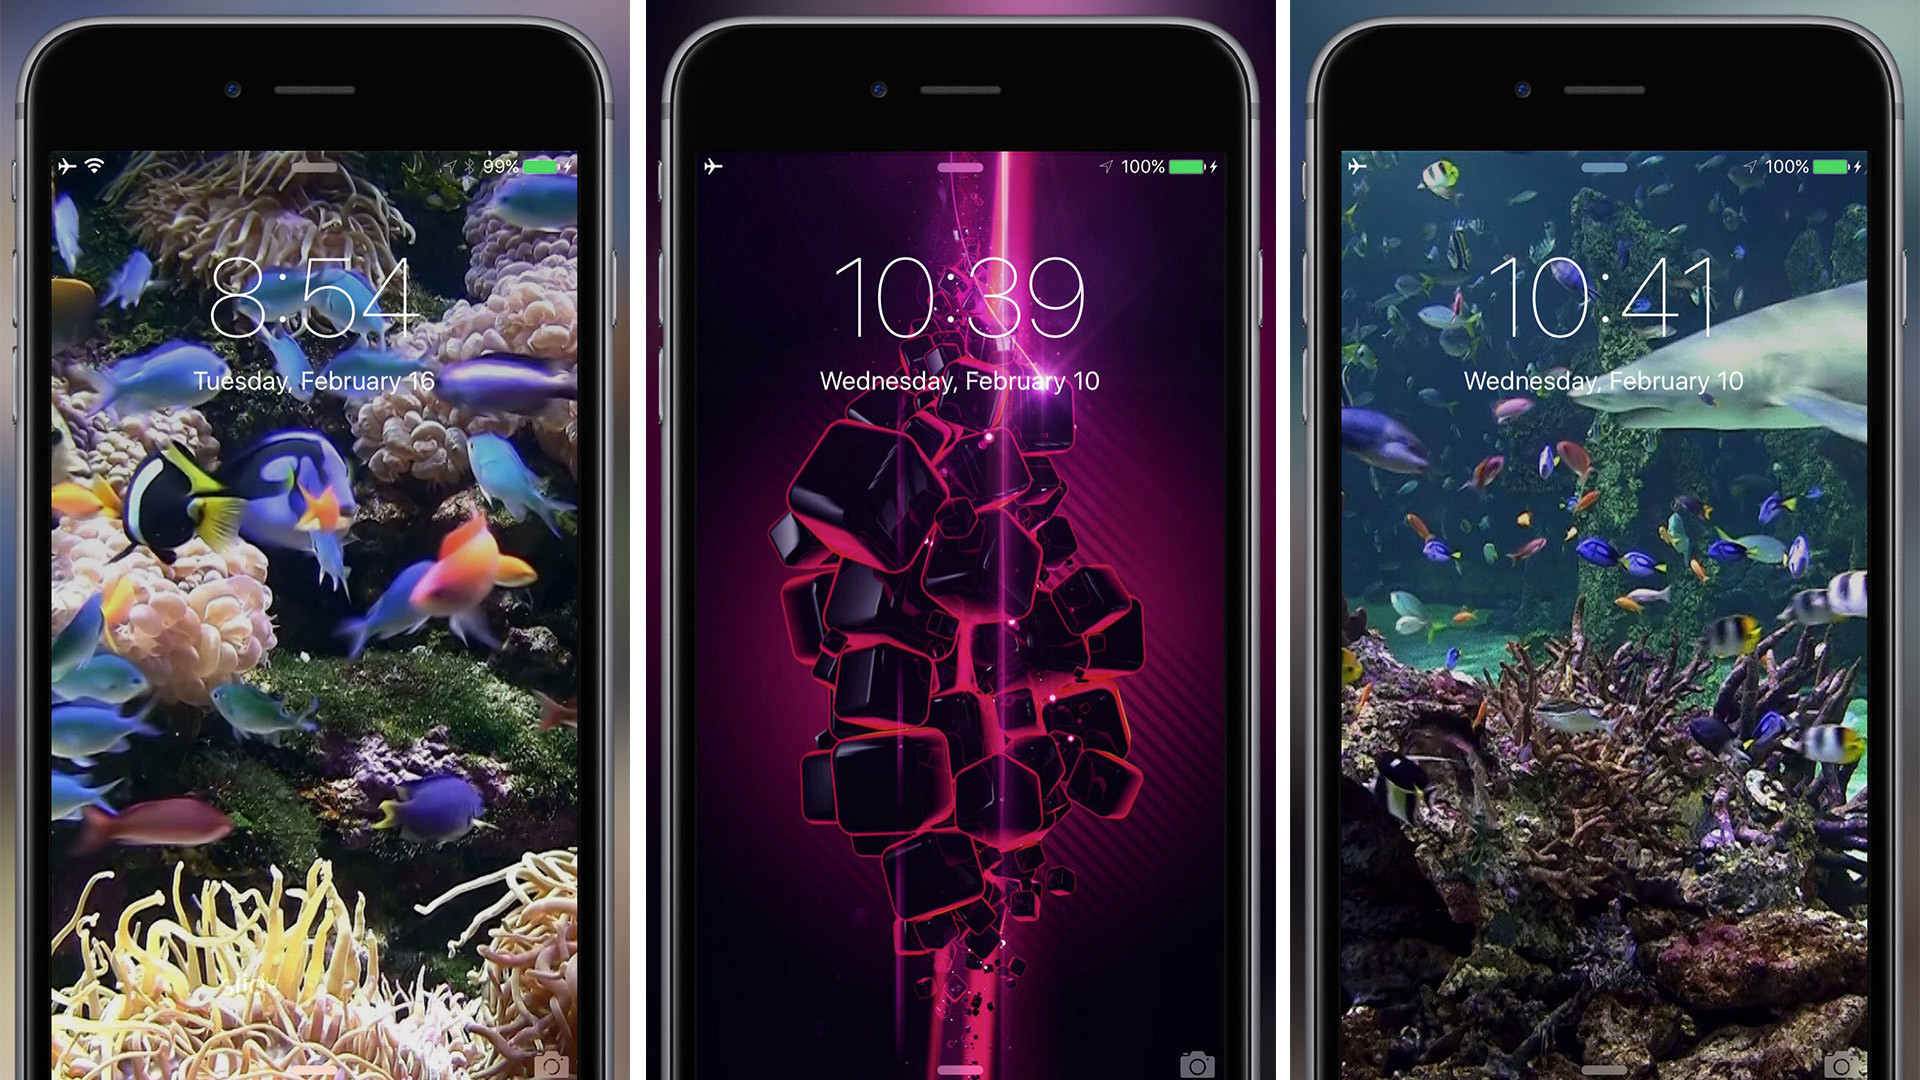 1920x1080 Best Live Wallpaper Apps for iPhone X, iPhone 8, and iPhone 8 Plus in 2019